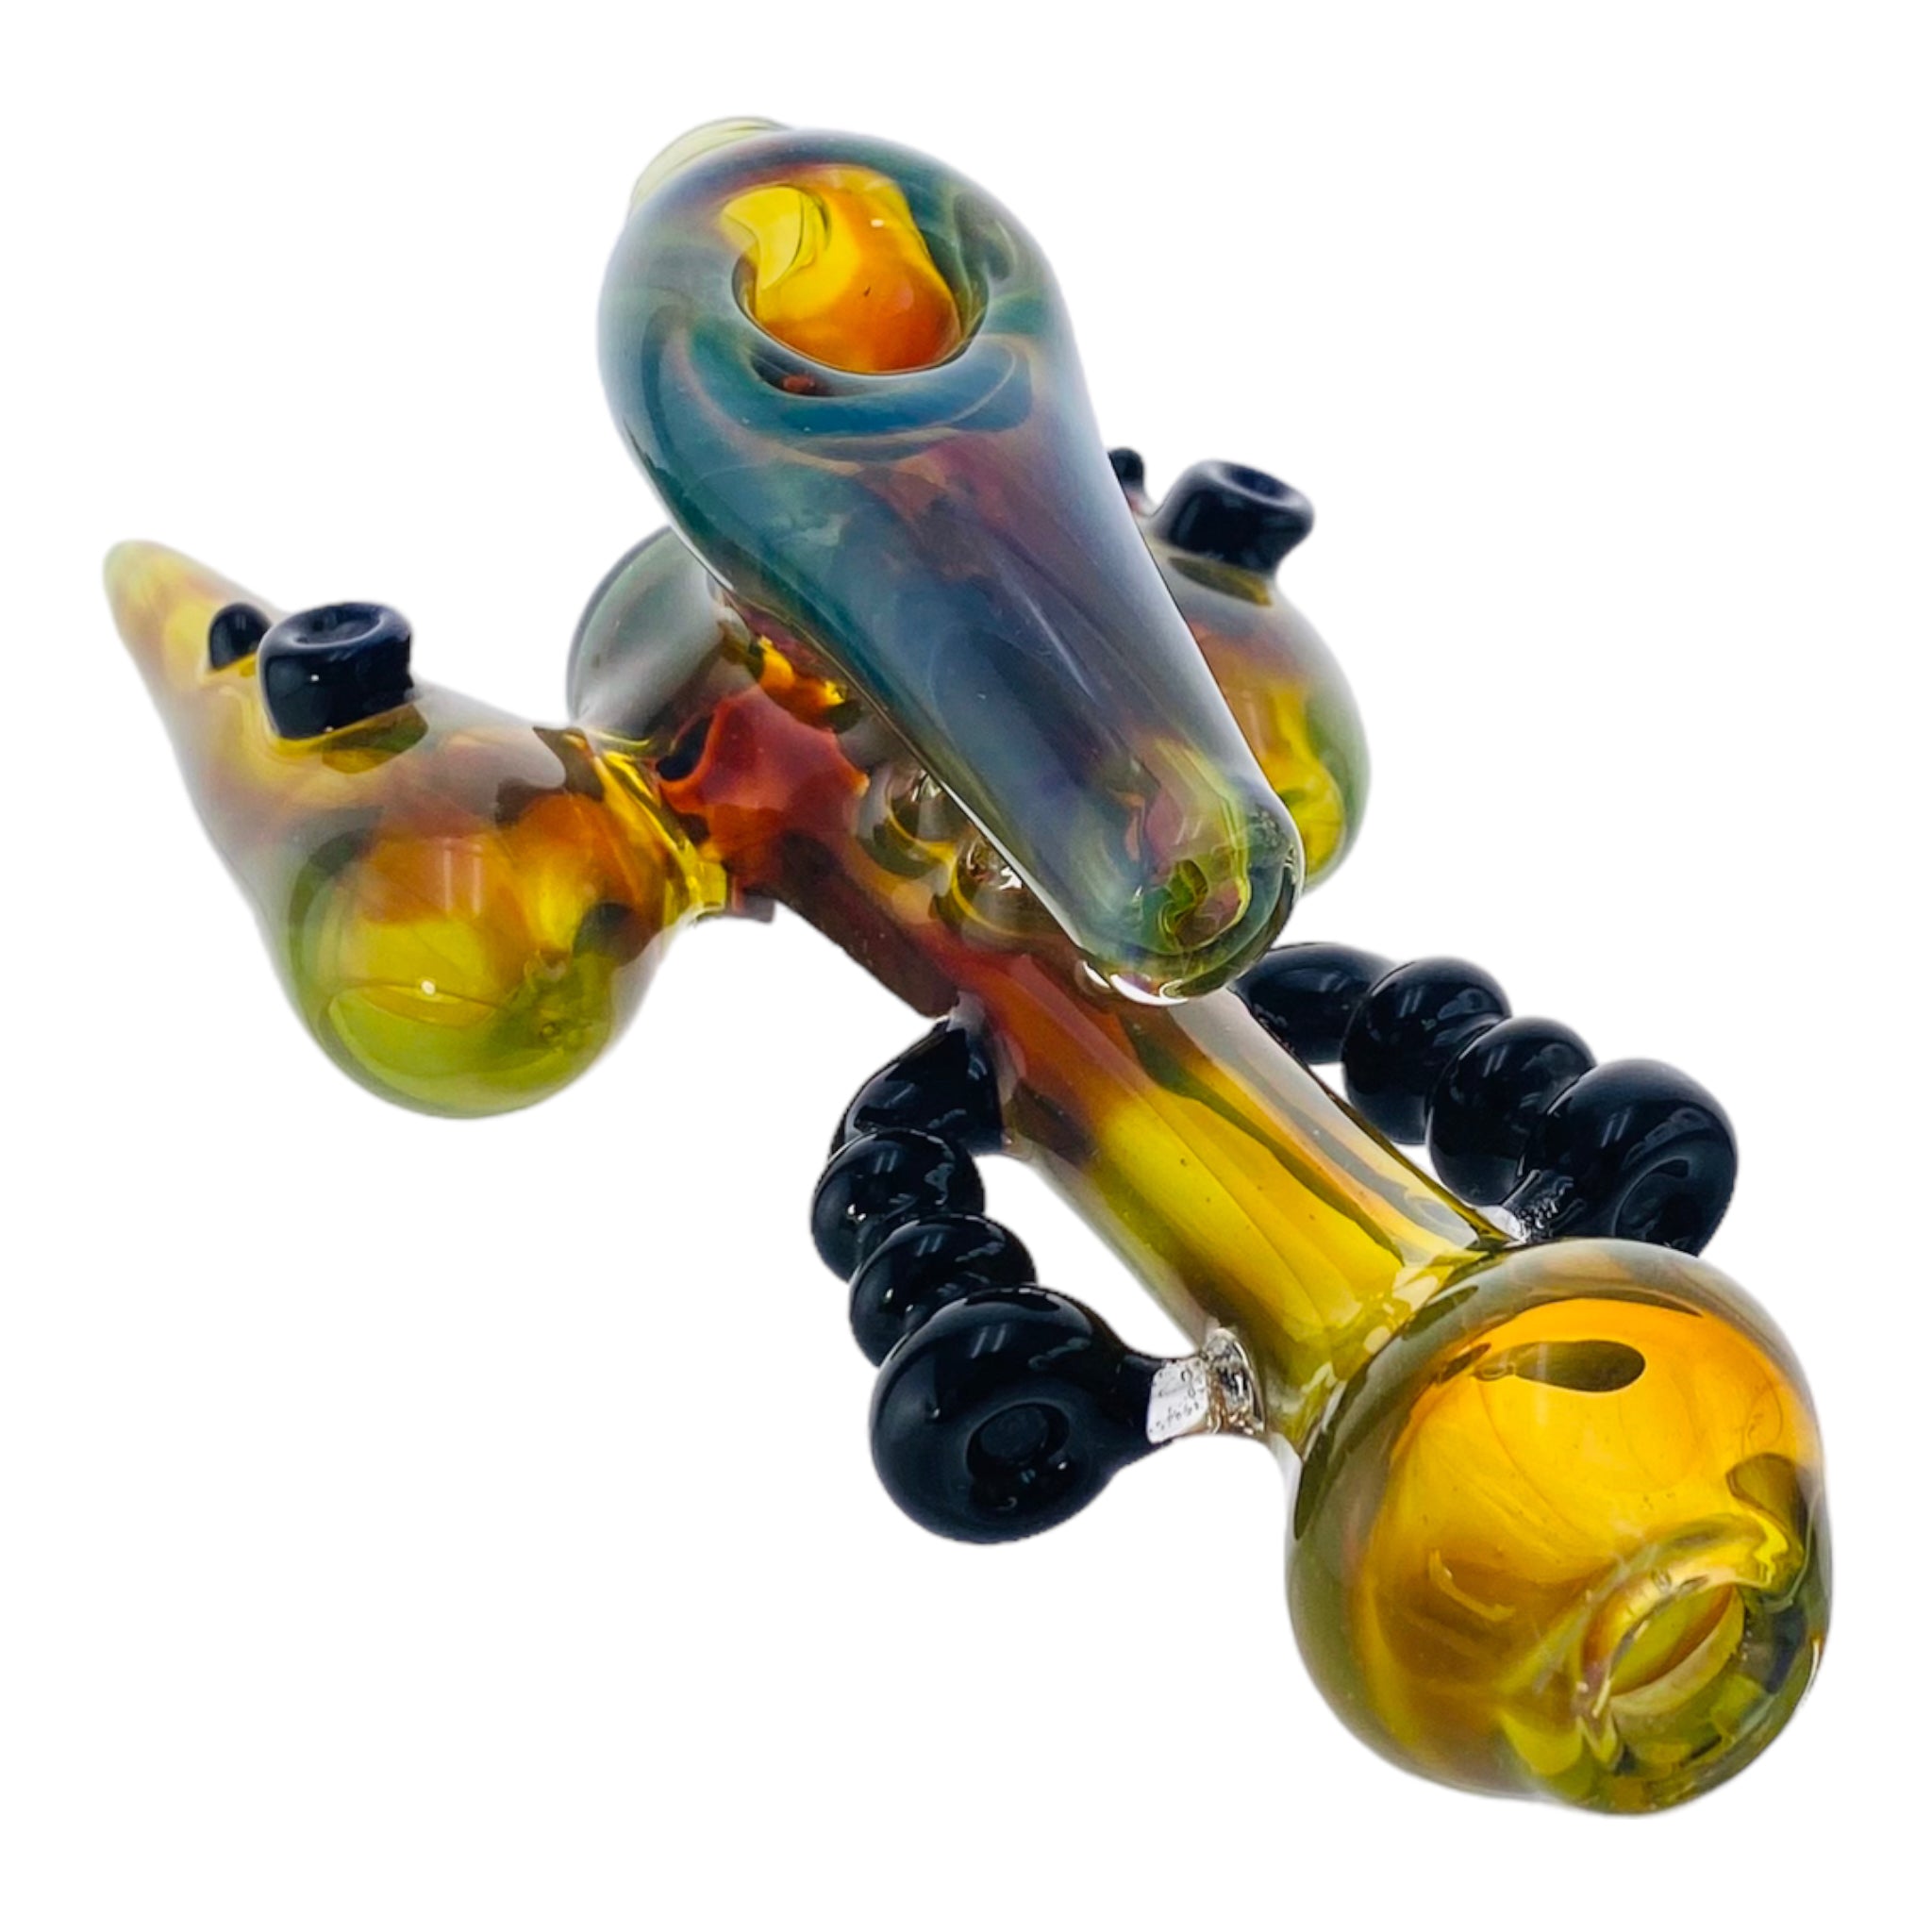 Alientech Pod Racer Glass Steam Roller Hand Pipe is a custom-made pipe Featuring a unique pod racer shape and made from robust Alientech glass